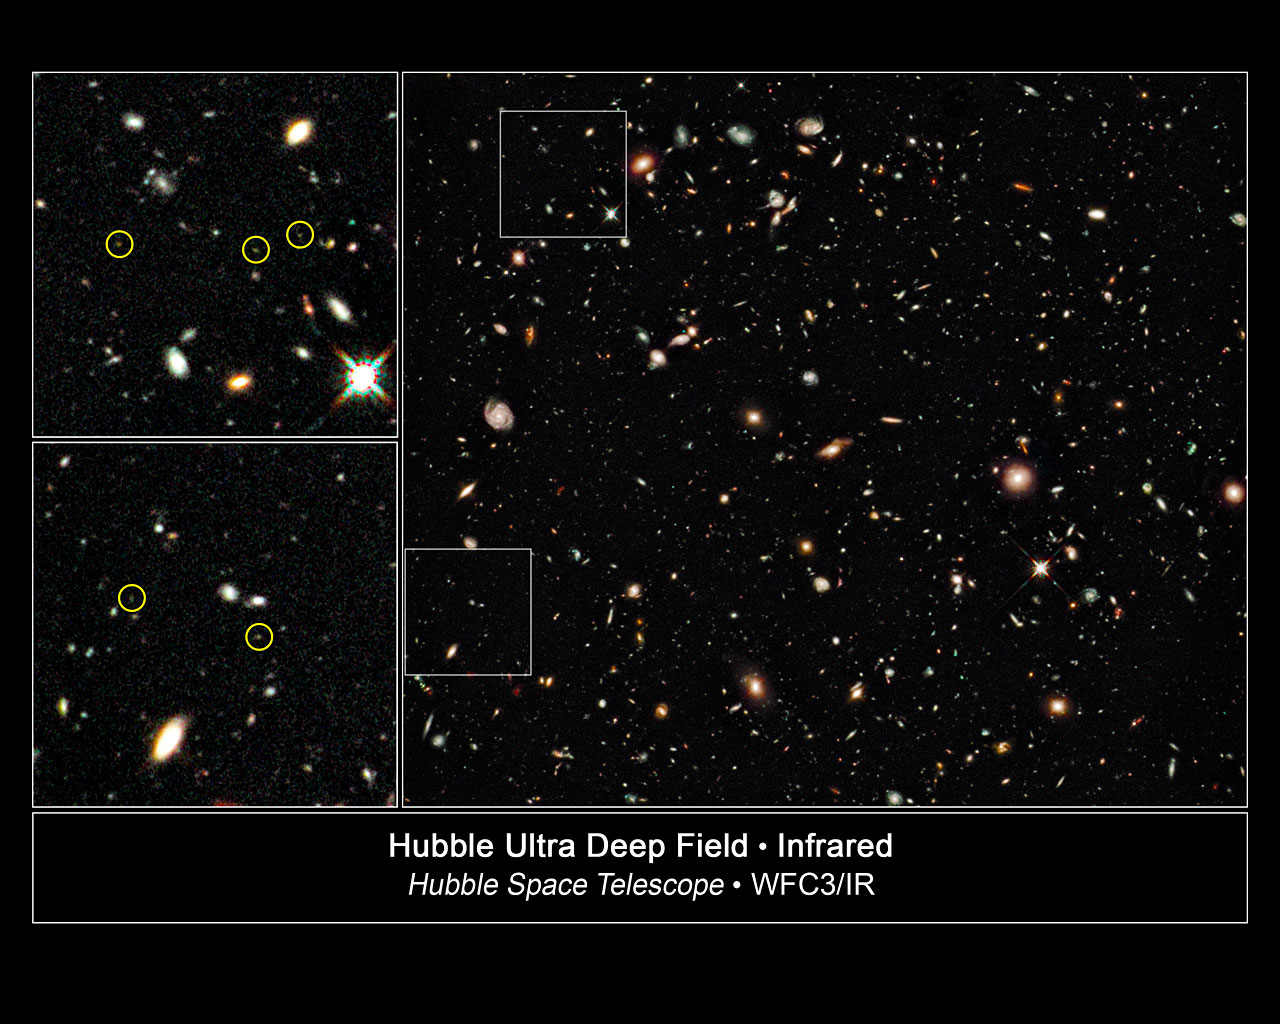 An earlier deep-field observation from 2010, which yielded 29 primordial galaxy candidates. Image Credit: NASA/ESA/G. Illingworth (UCO/Lick Observatory and University of California, Santa Cruz)/HUDF09 Team